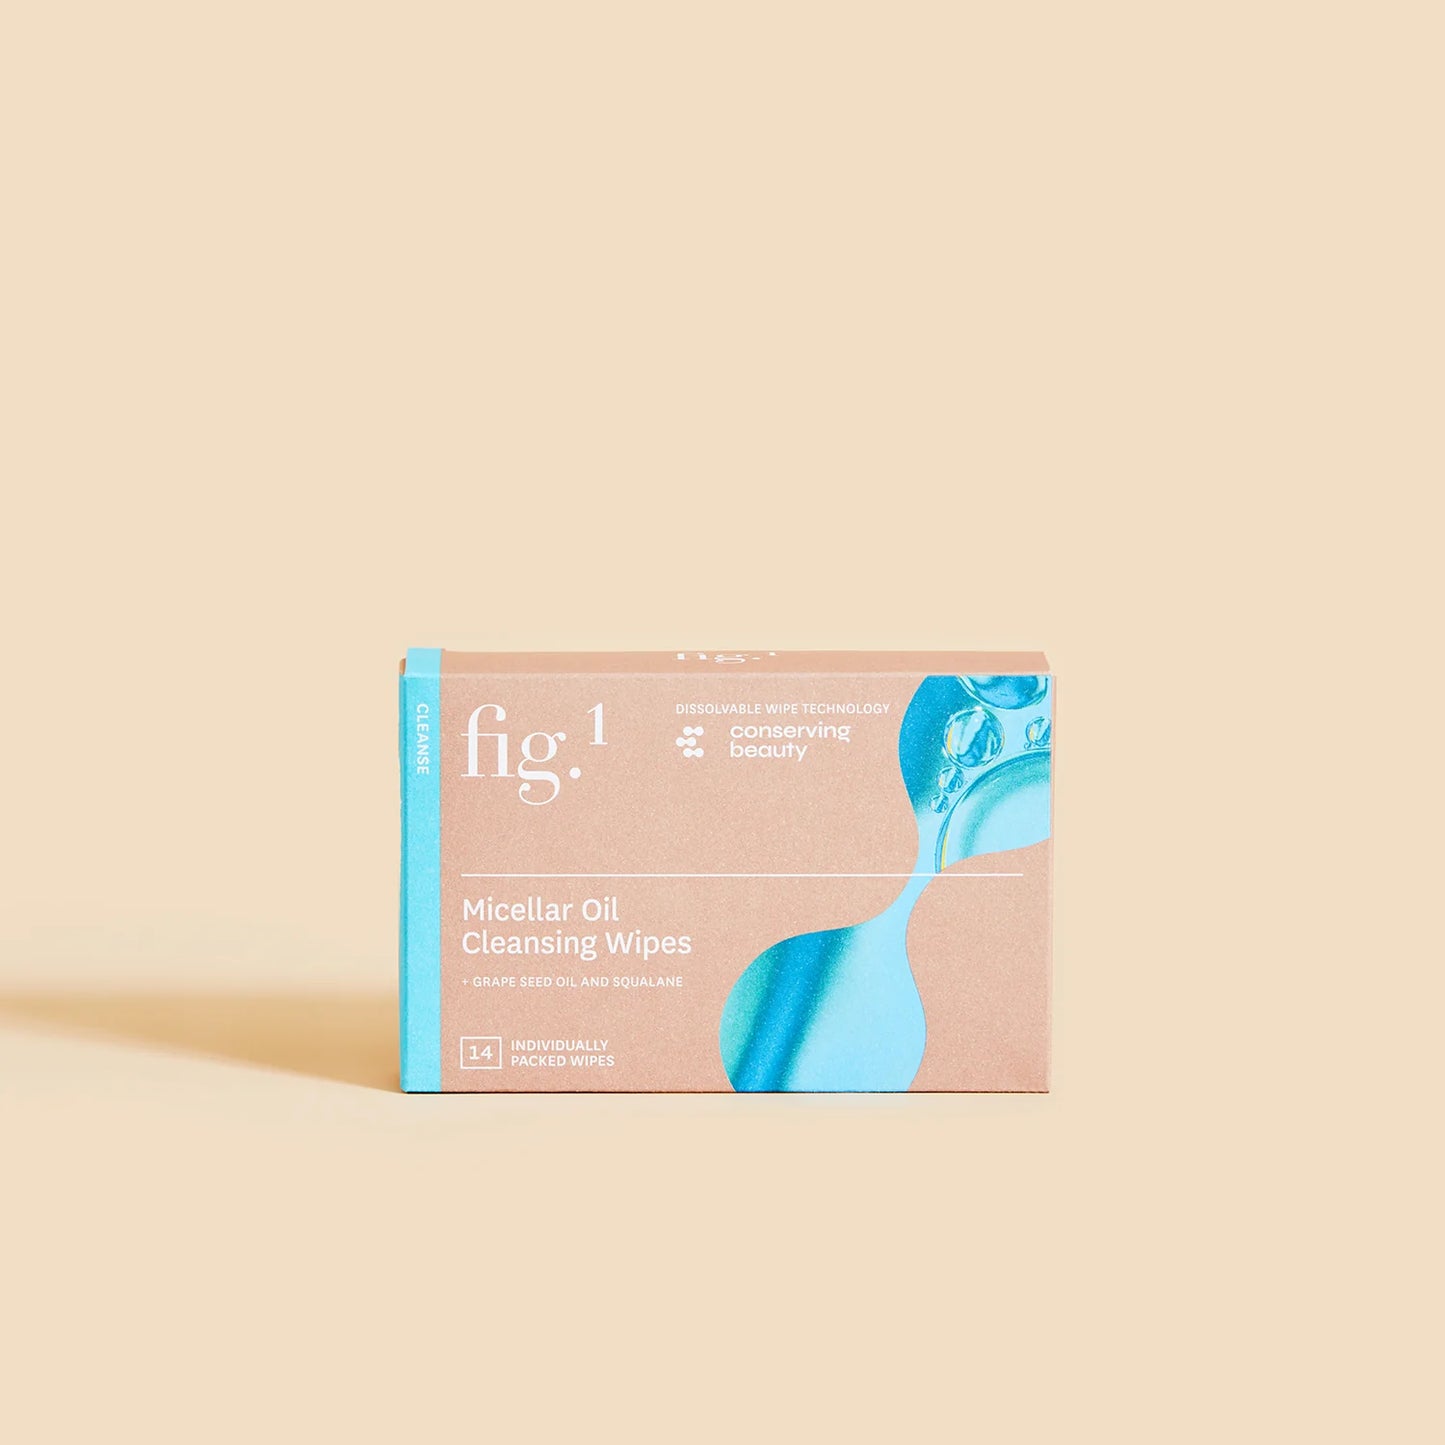 Micellar Oil Cleansing Wipes - 14 Biodegradable Wipes